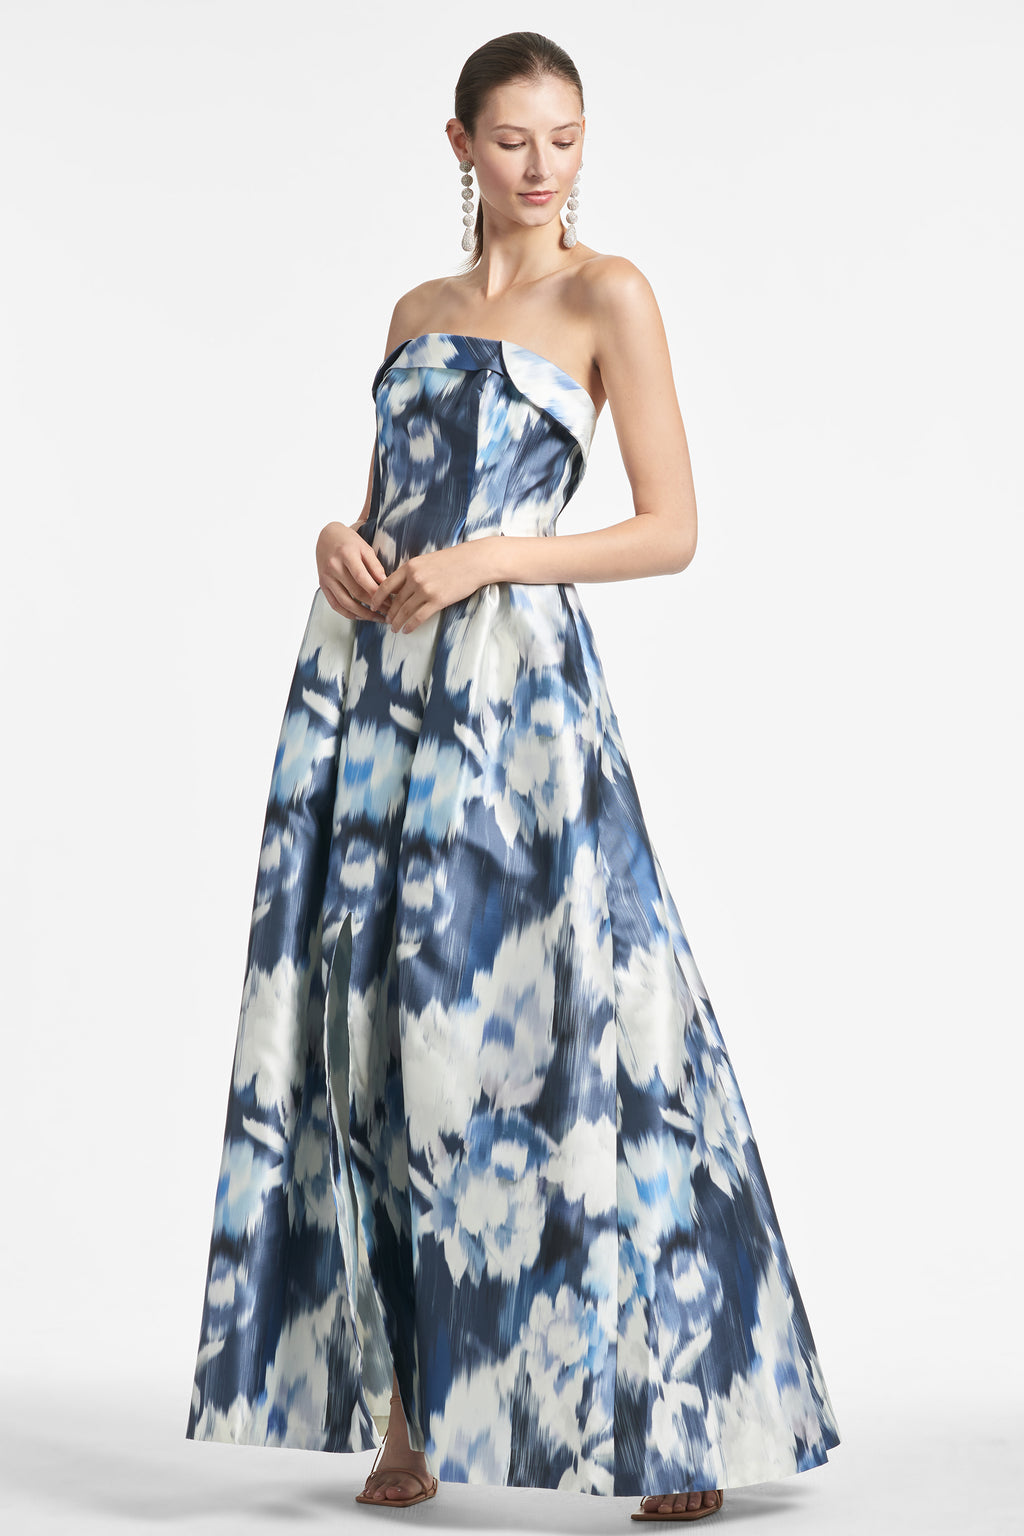 white and blue floral dress